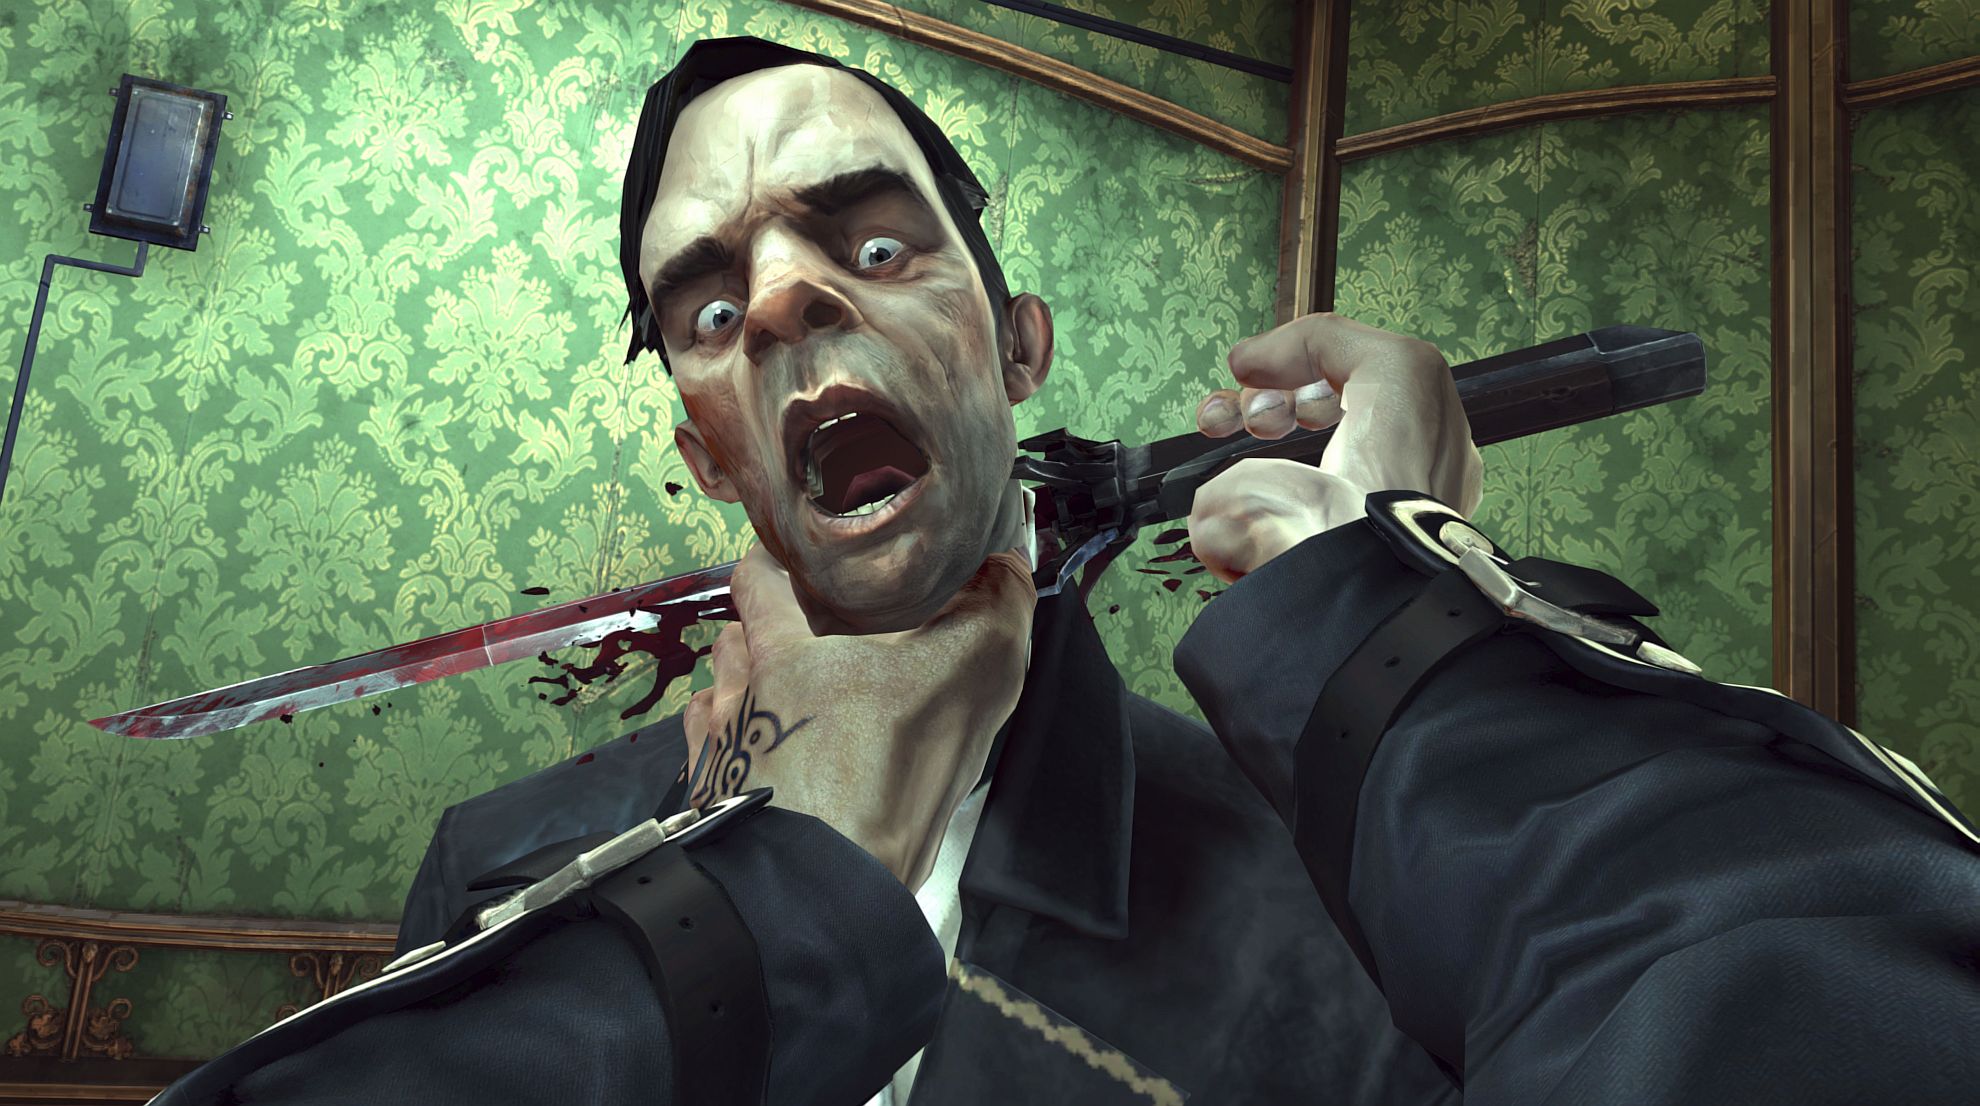 A "bad" moral choice in Dishonored